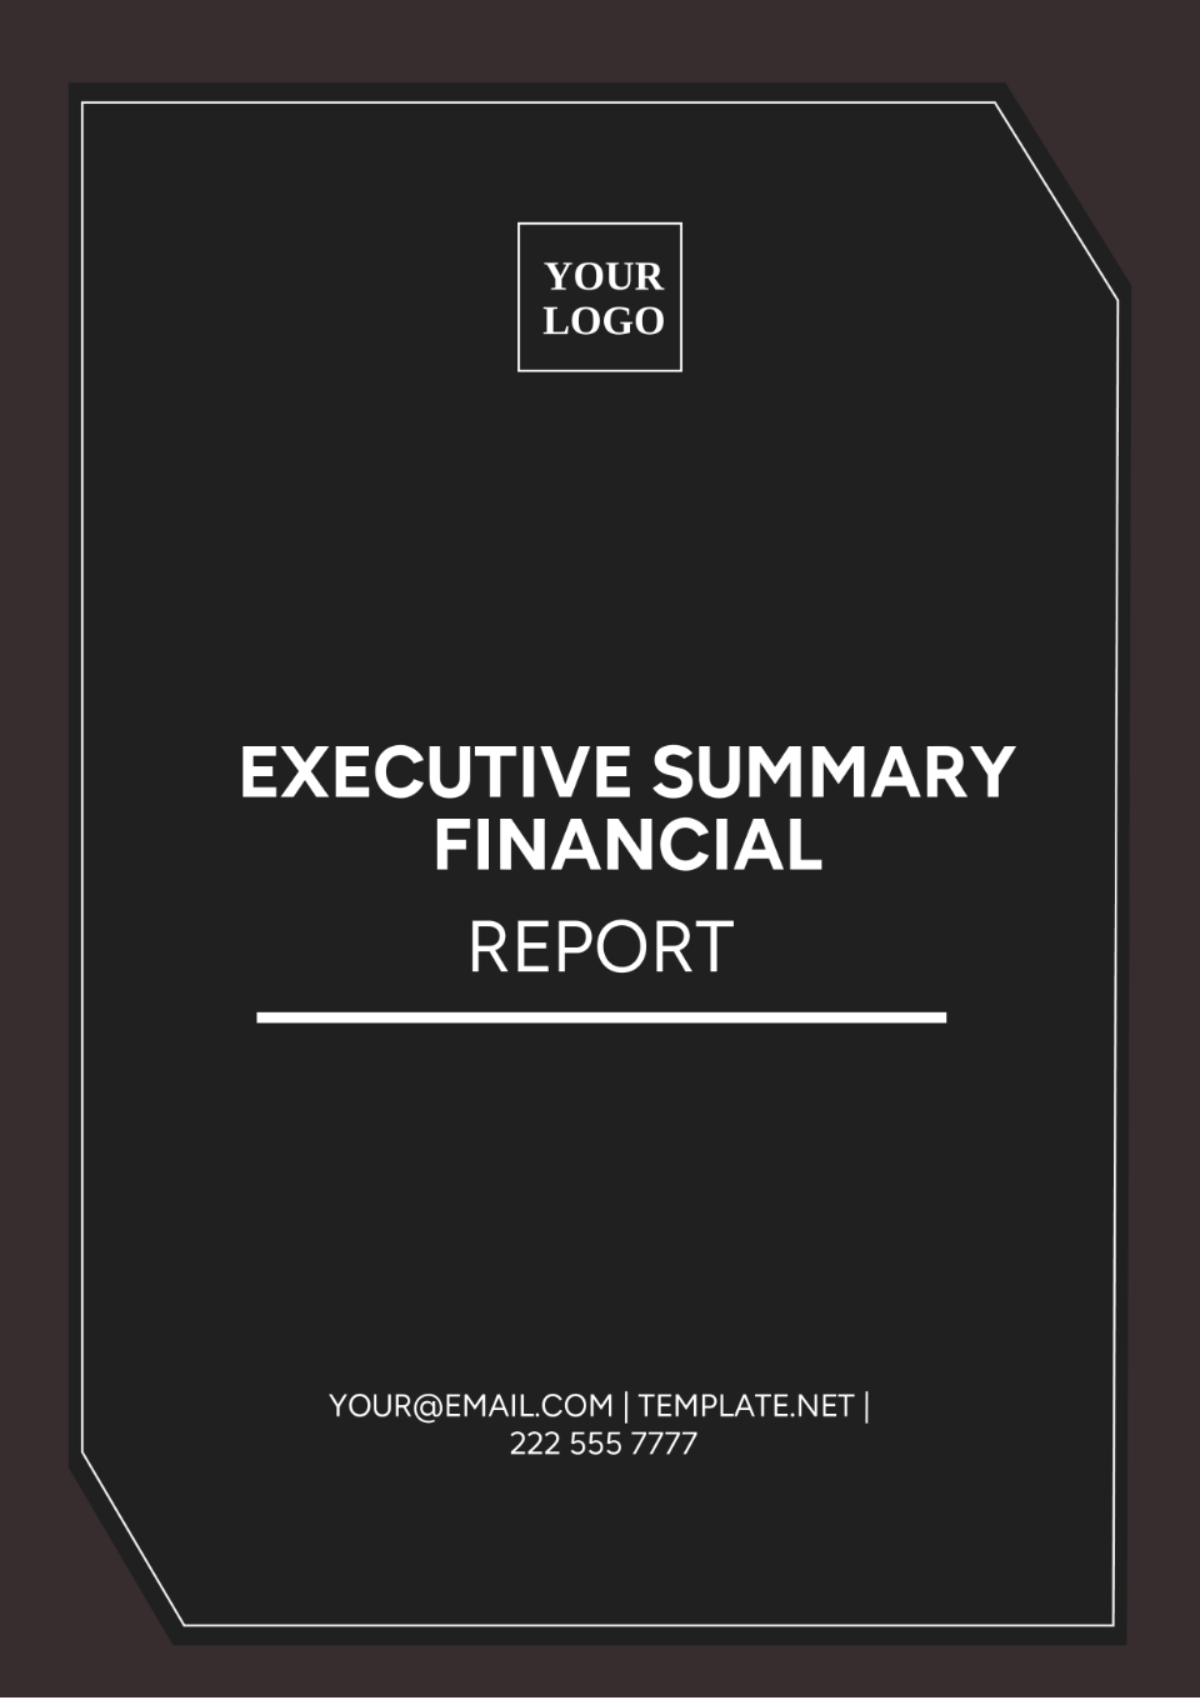 Executive Summary Financial Report Template